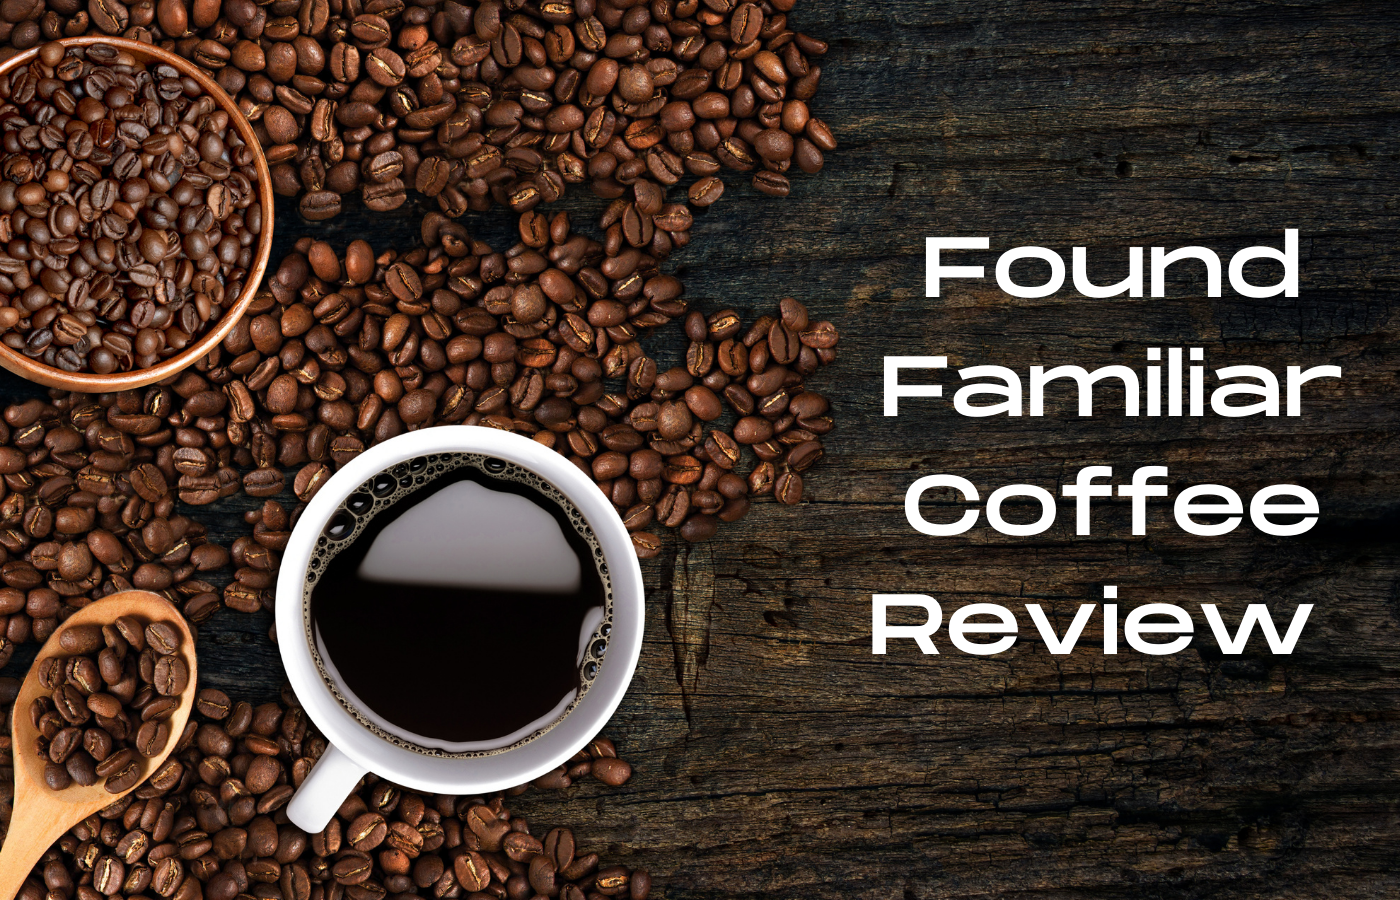 text reads Found Familiar Coffee Review over a background of coffee beans